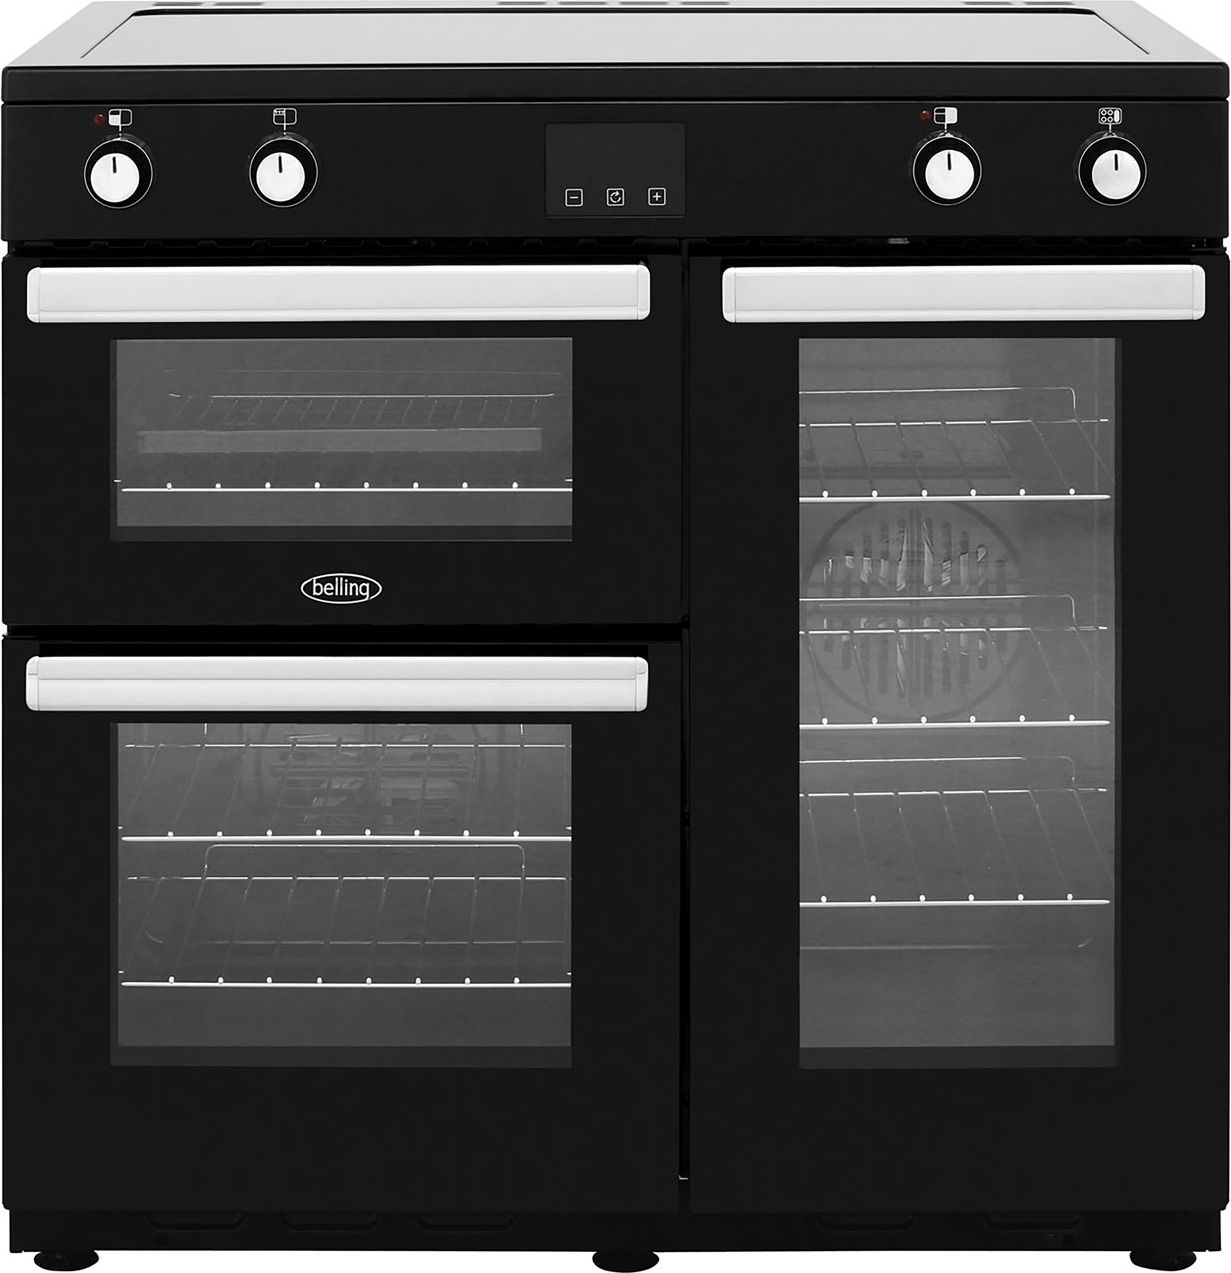 Belling Cookcentre90Ei 90cm Electric Range Cooker with Induction Hob - Black - A/A Rated, Black